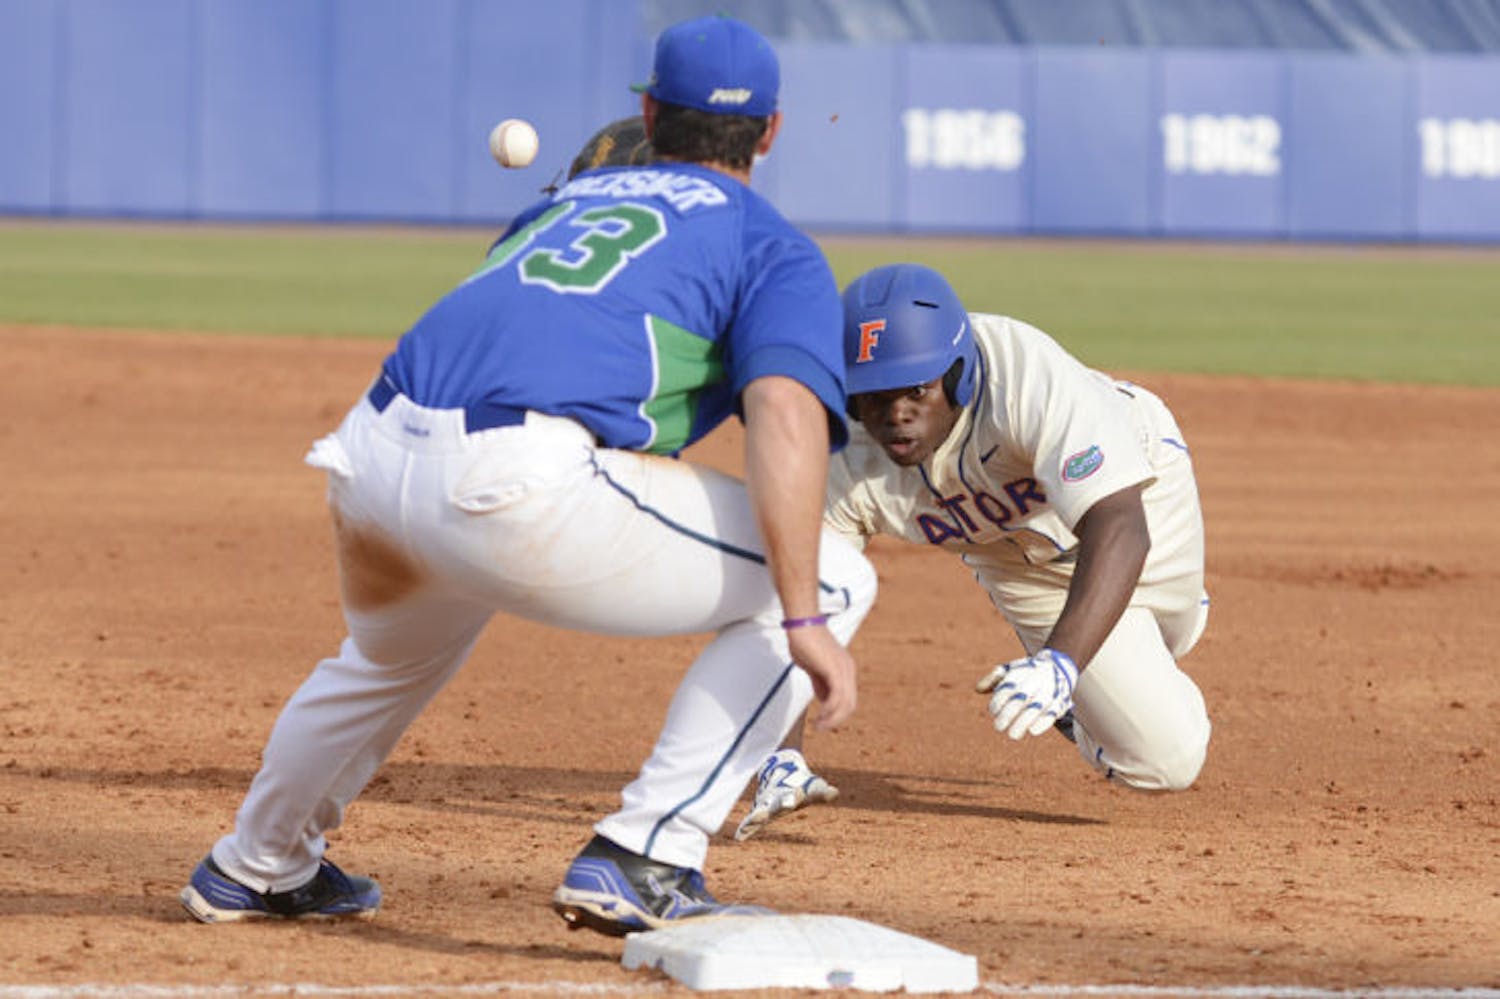 Sophomore infielder Josh Tobias attempts to get back on first base on a pickoff attempt during Florida’s 8-3 loss to FGCU on Feb. 23 at McKethan Stadium.